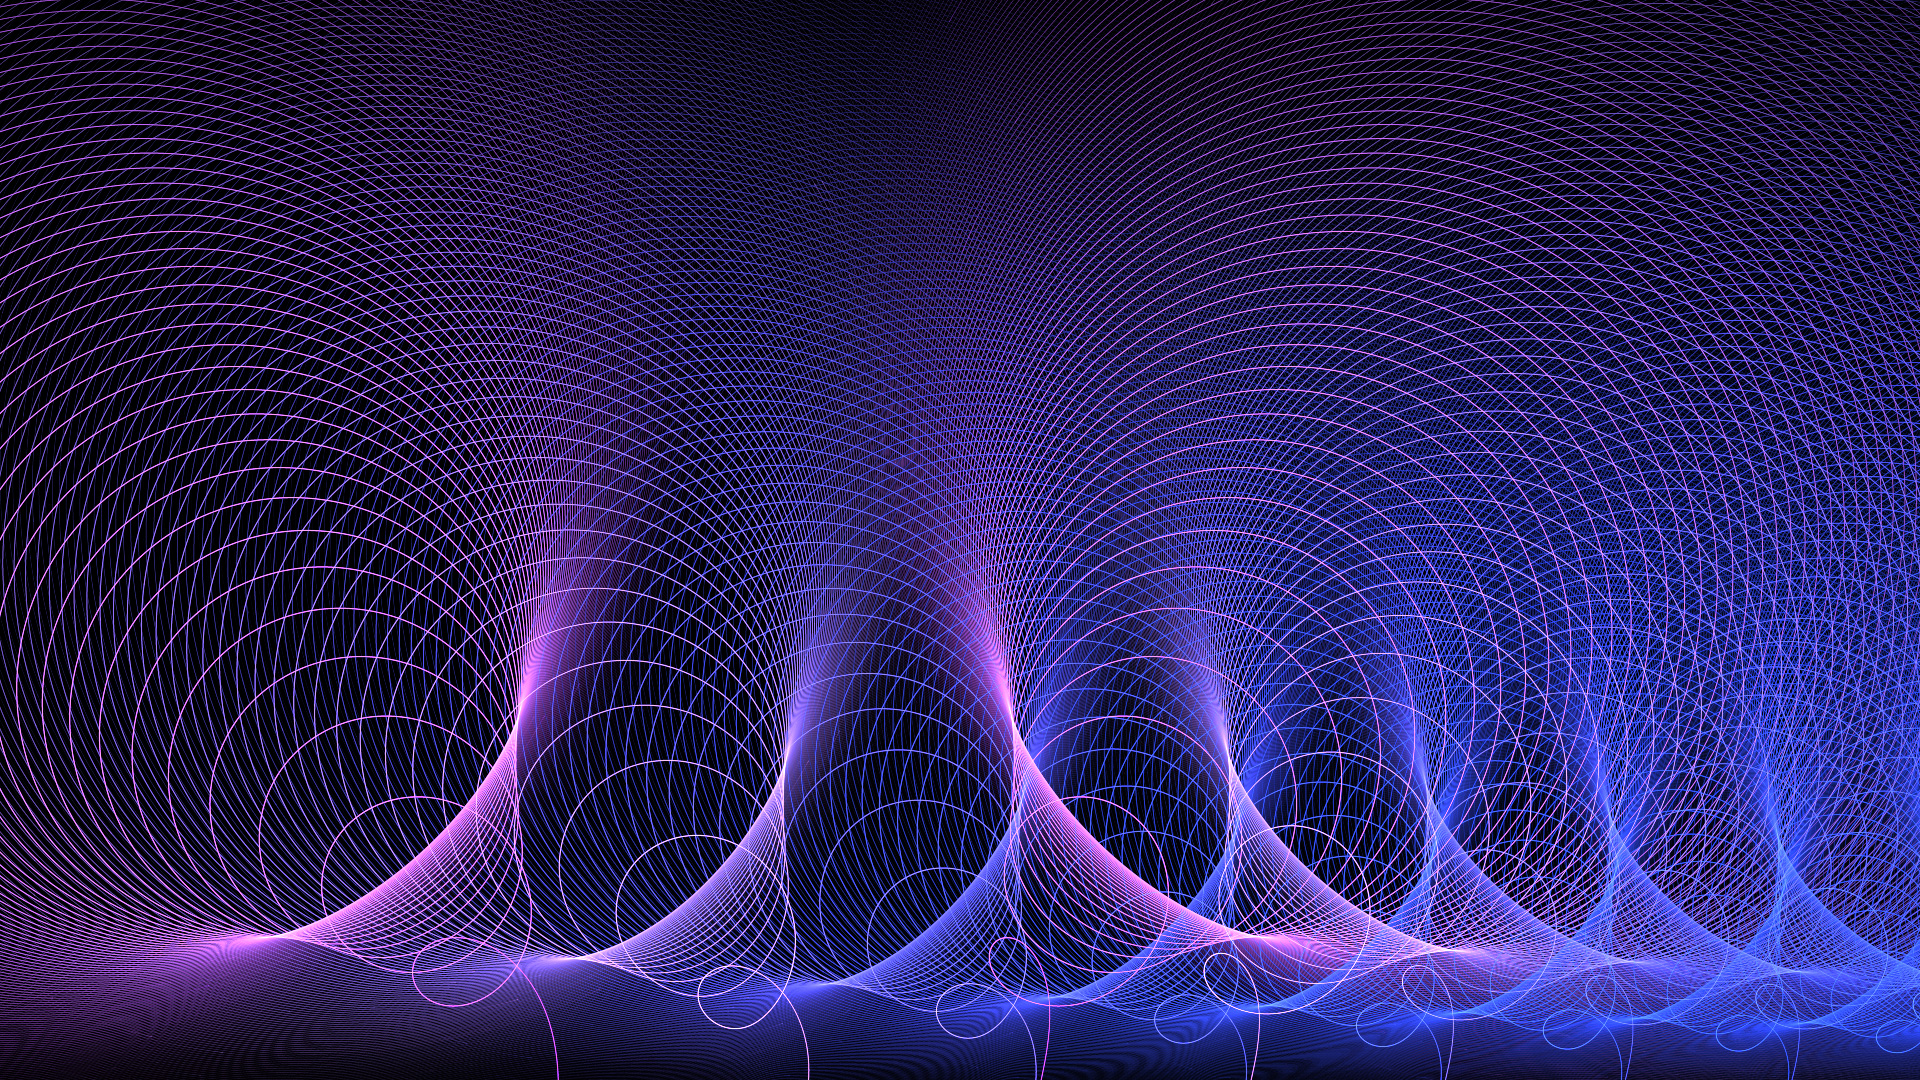 Acoustic Waves Abstract Purple Artistic Wallpapers